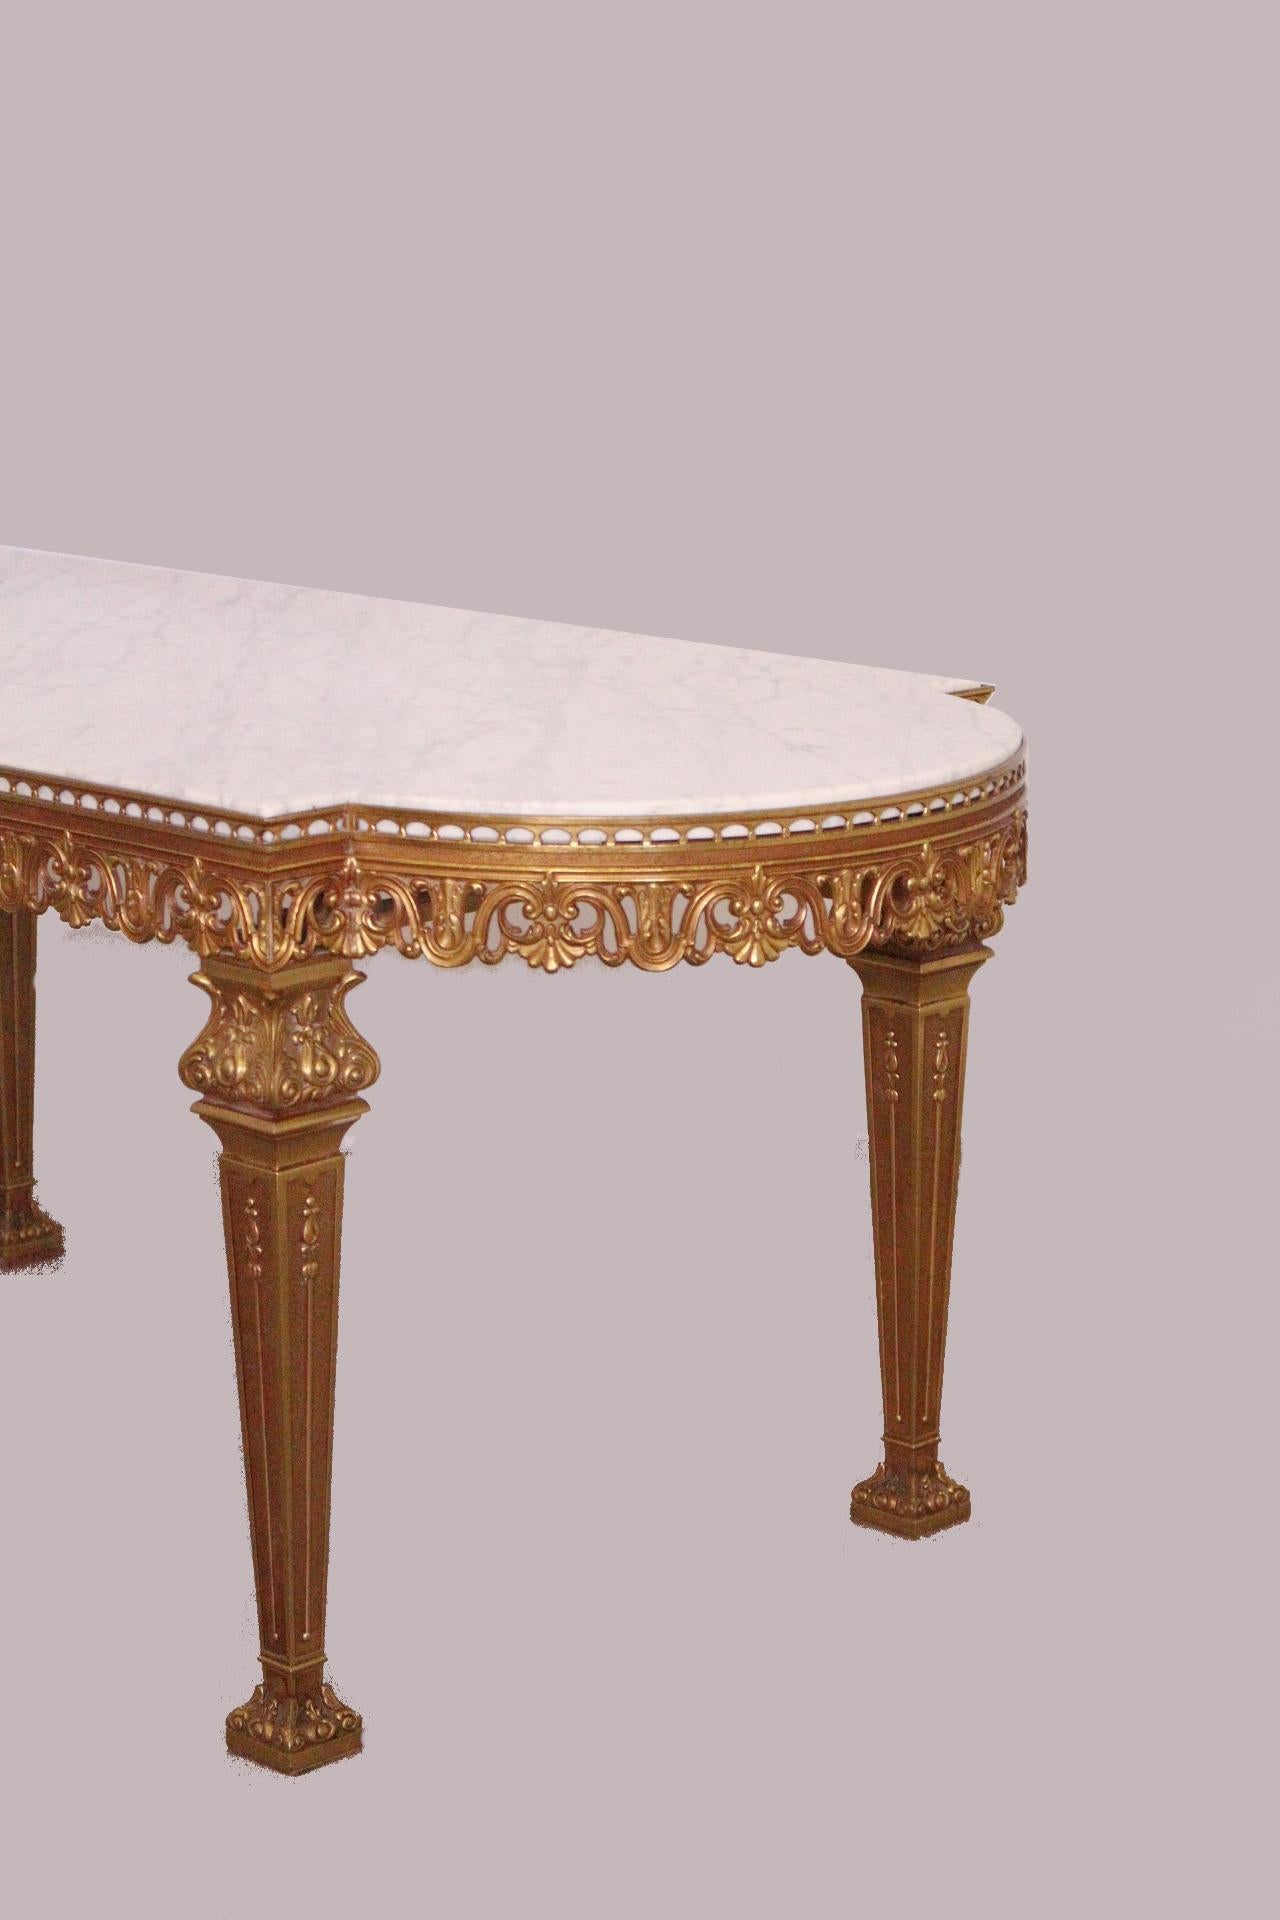 Coffee table gilt brass and marble French vintage Louis XVI style
Good quality heavy Gilt brass base
With shaped white variegated marble top
Very good vintage condition with only very minor signs of use for its age.